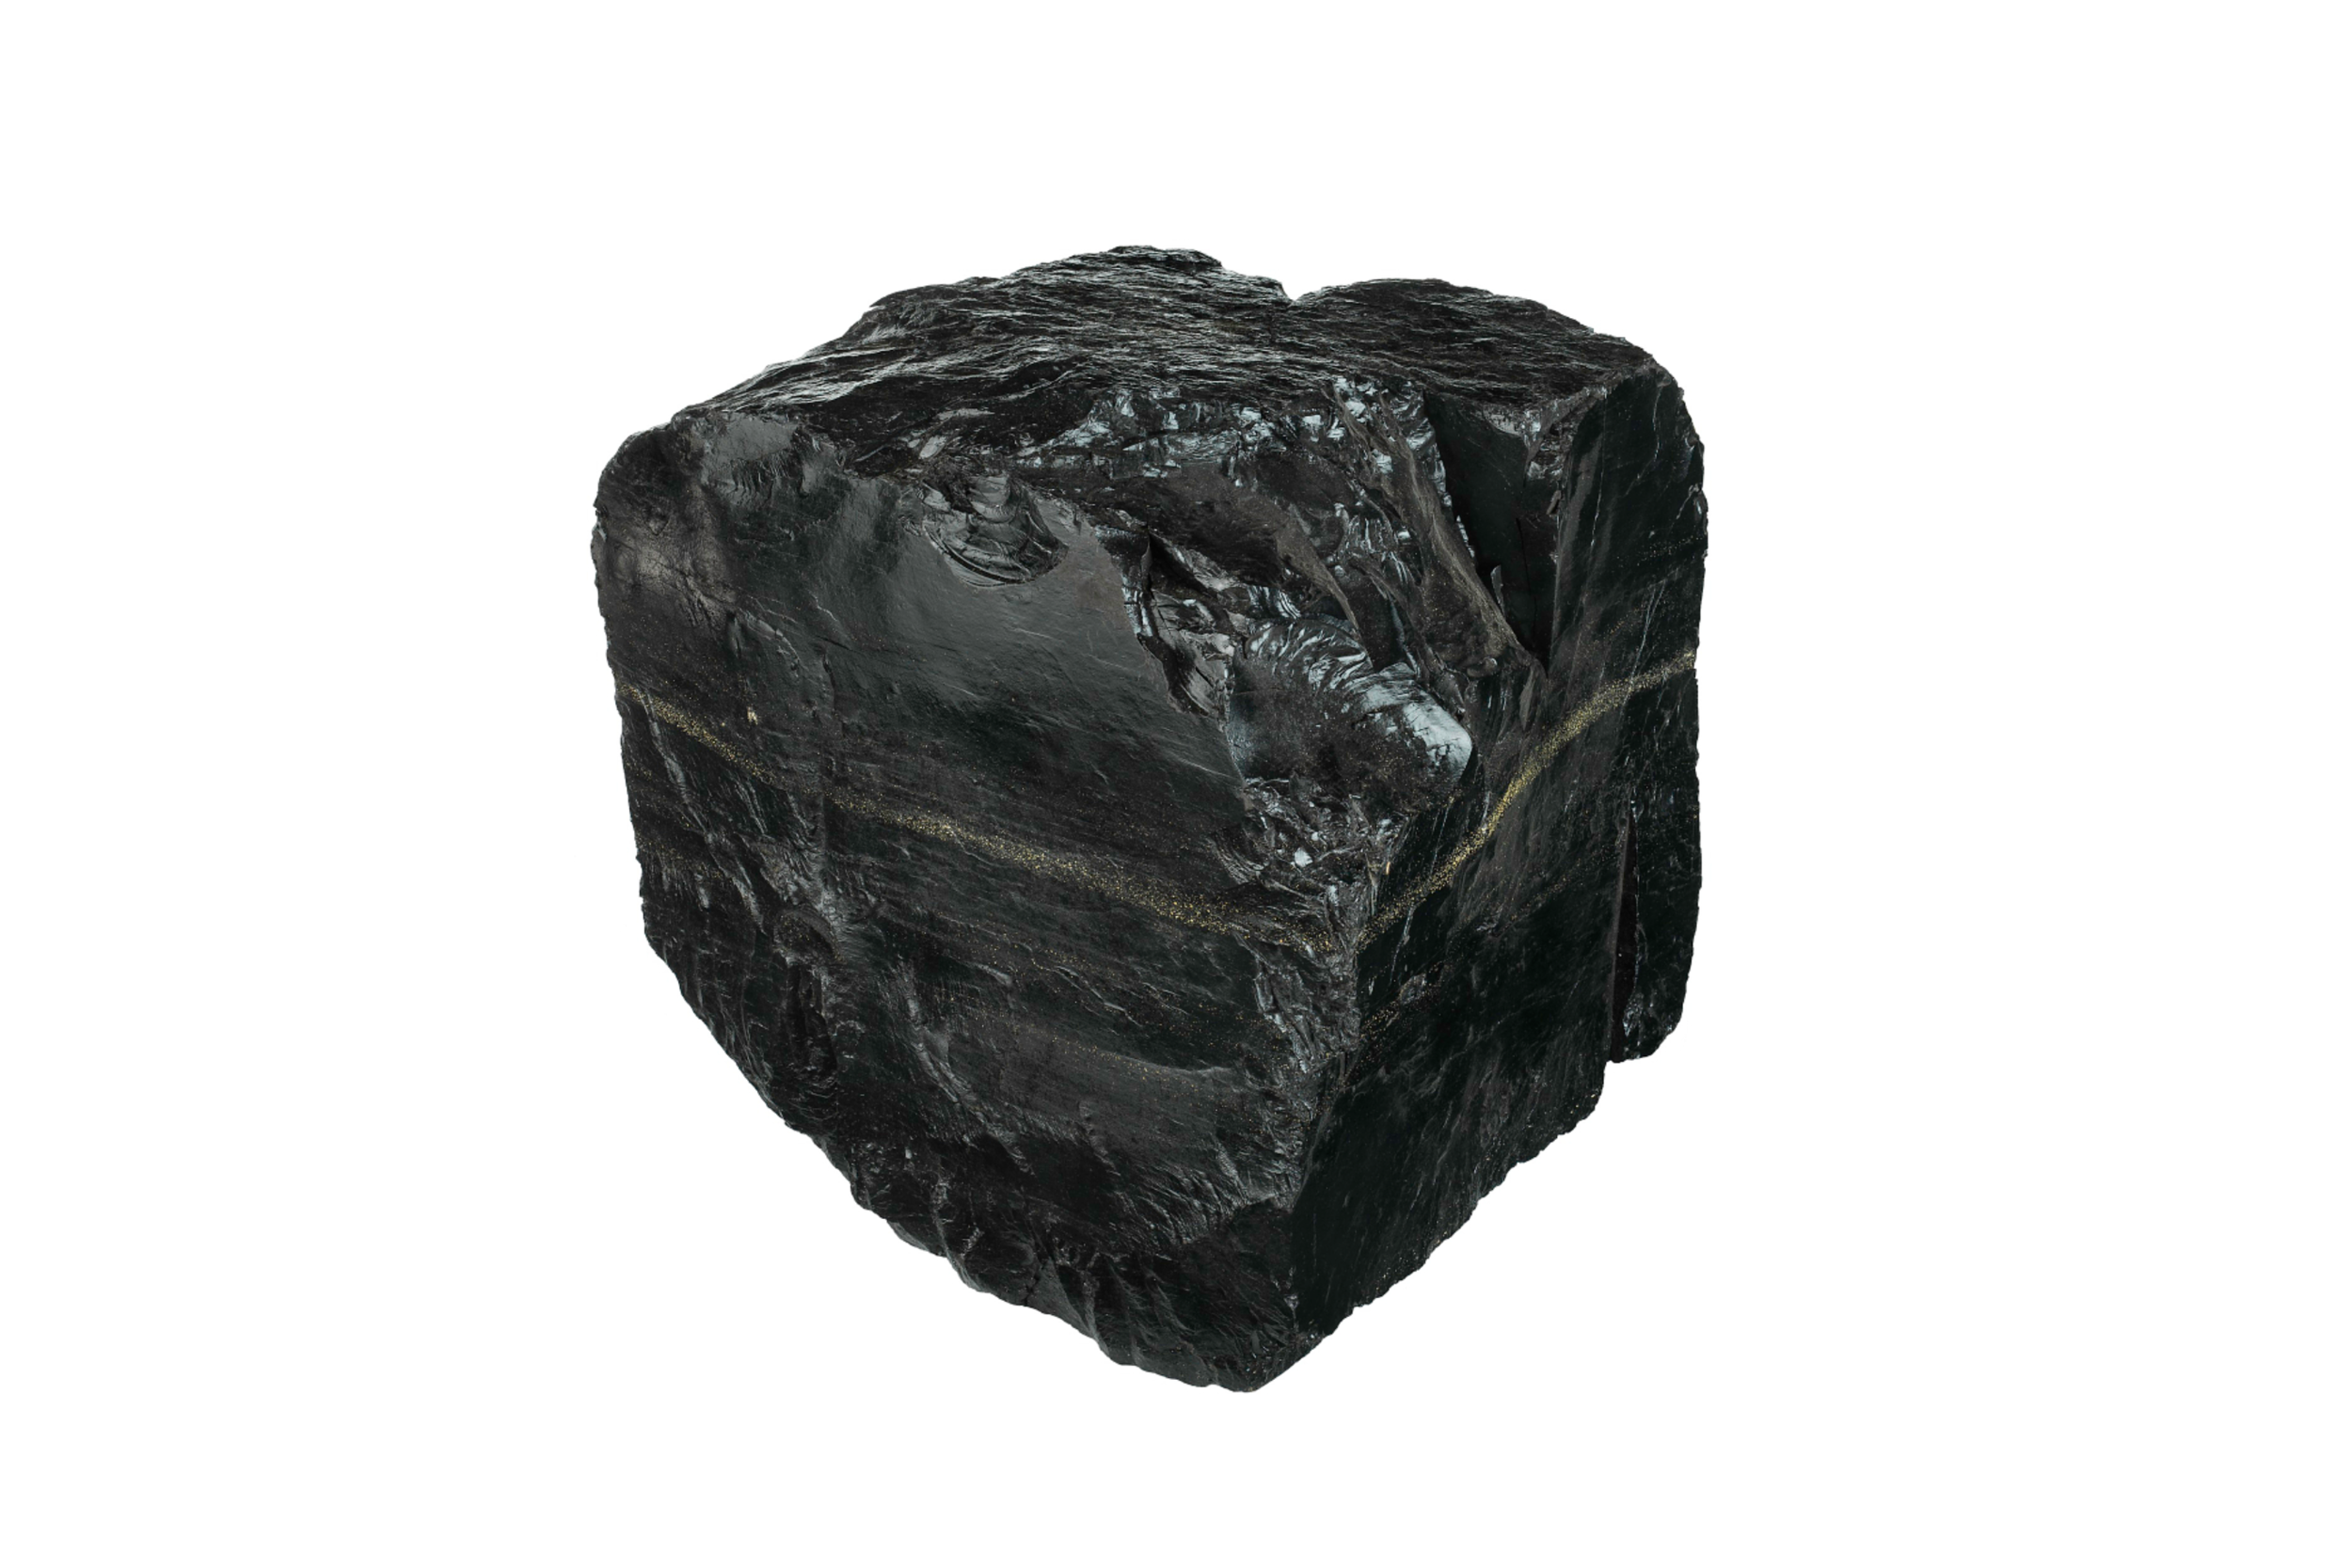 A piece of coal from the Cedar Grove seam in Logan County, West Virginia Source: Courtesy of National Museum of American History, Kenneth E. Behring Center via Smithsonian Institution